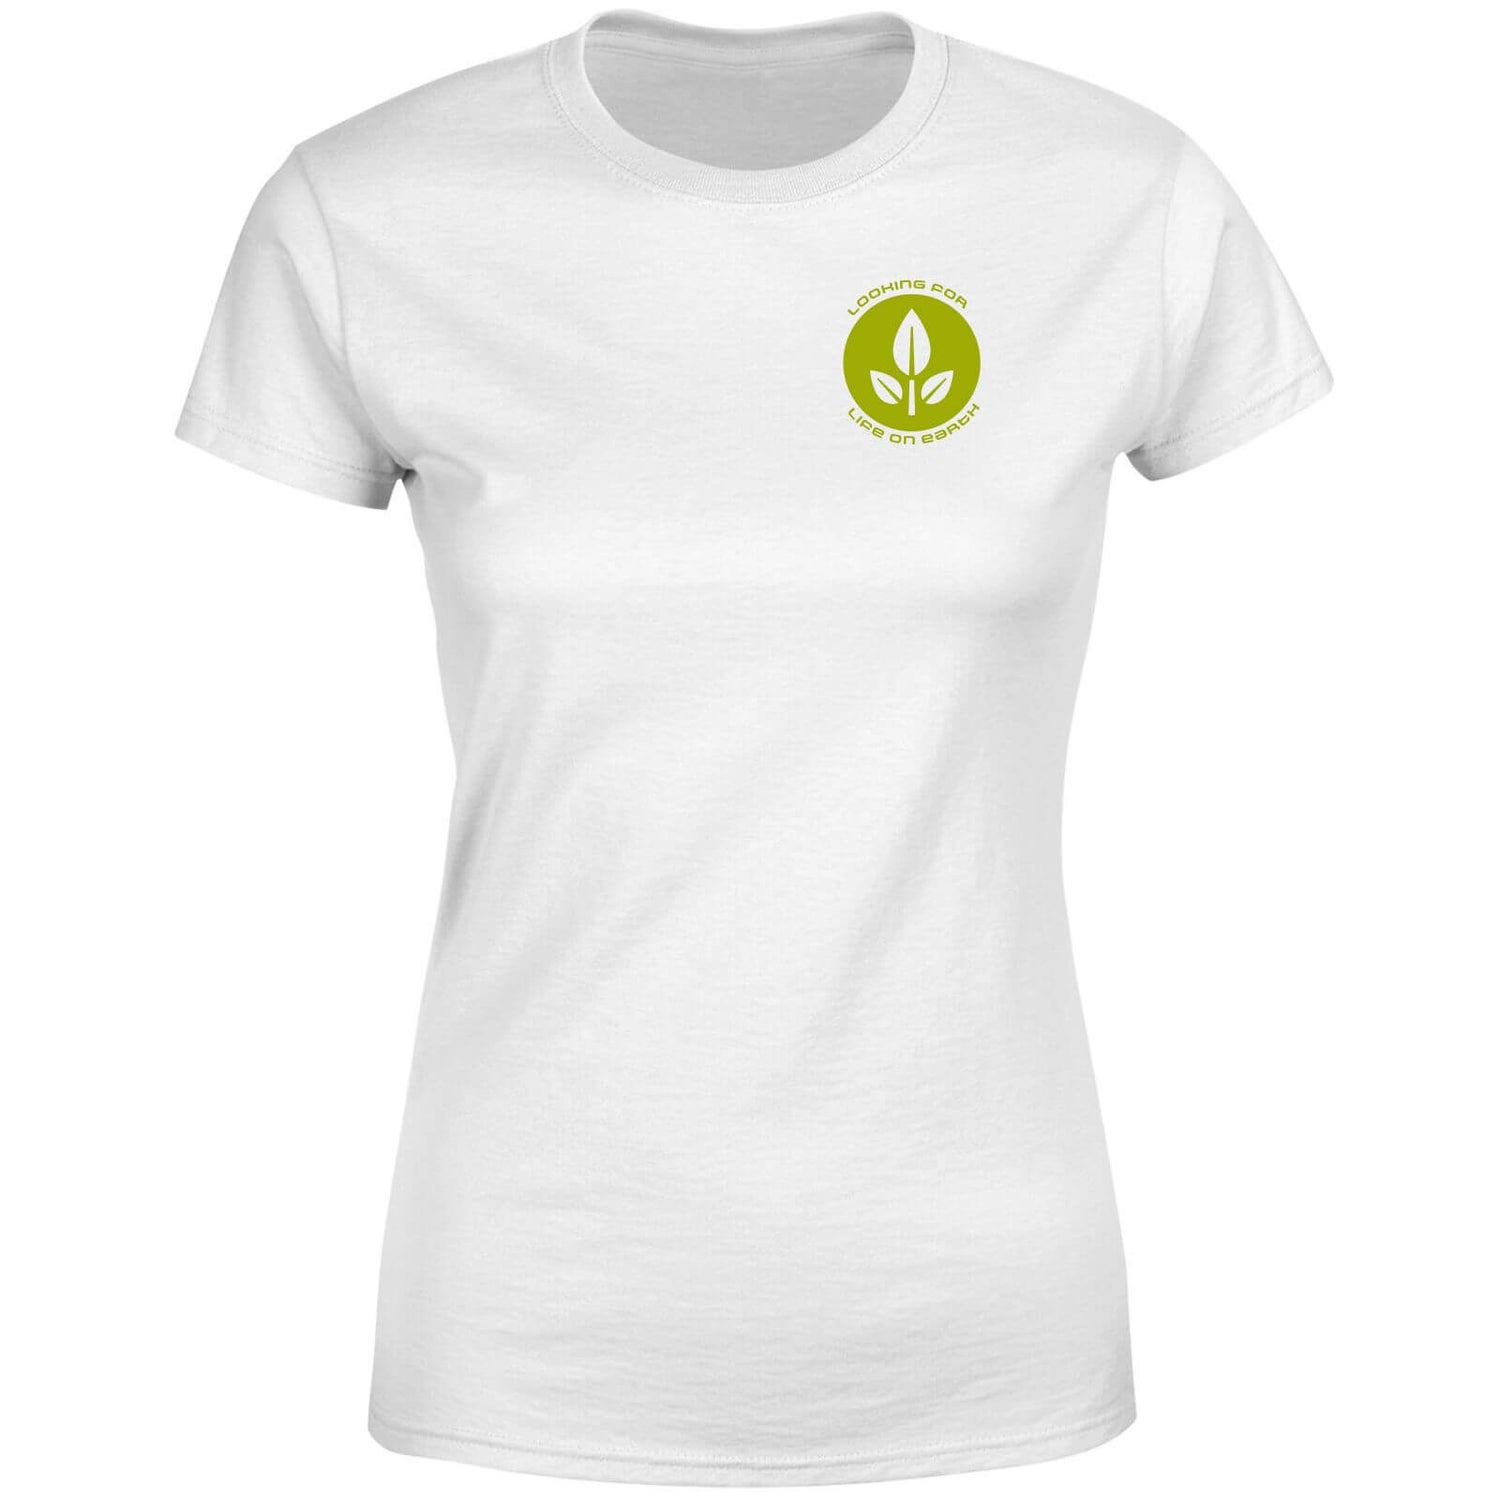 Wall-E Looking For Life On Earth Women's T-Shirt - White